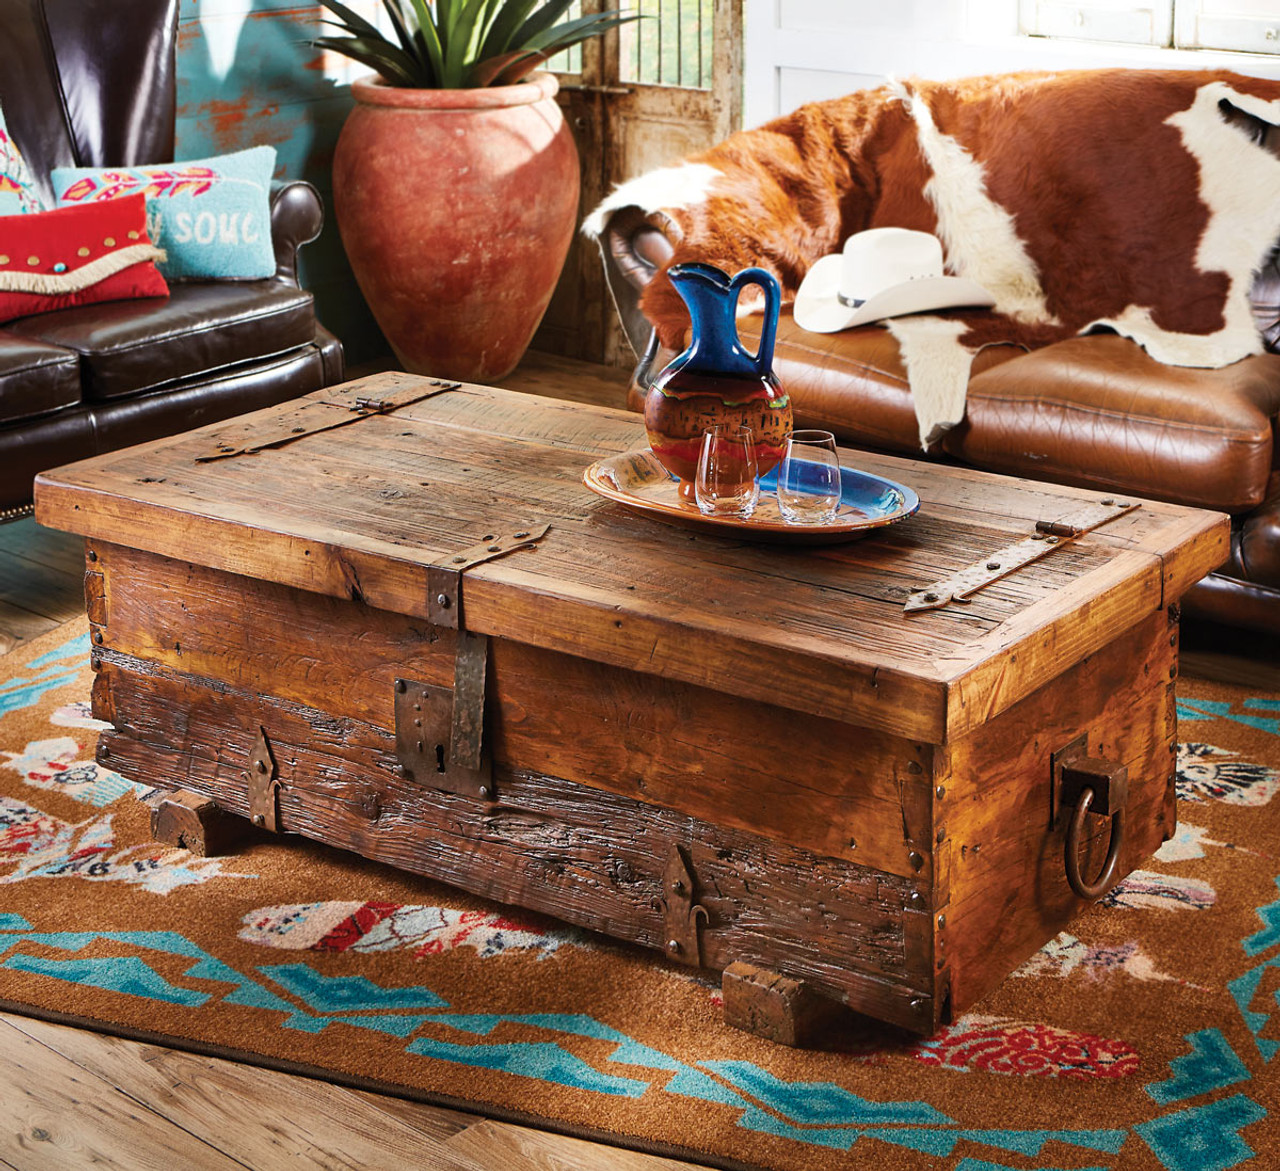 Chest Trunk Coffee Table Storage Box Part Reclaimed Wood 